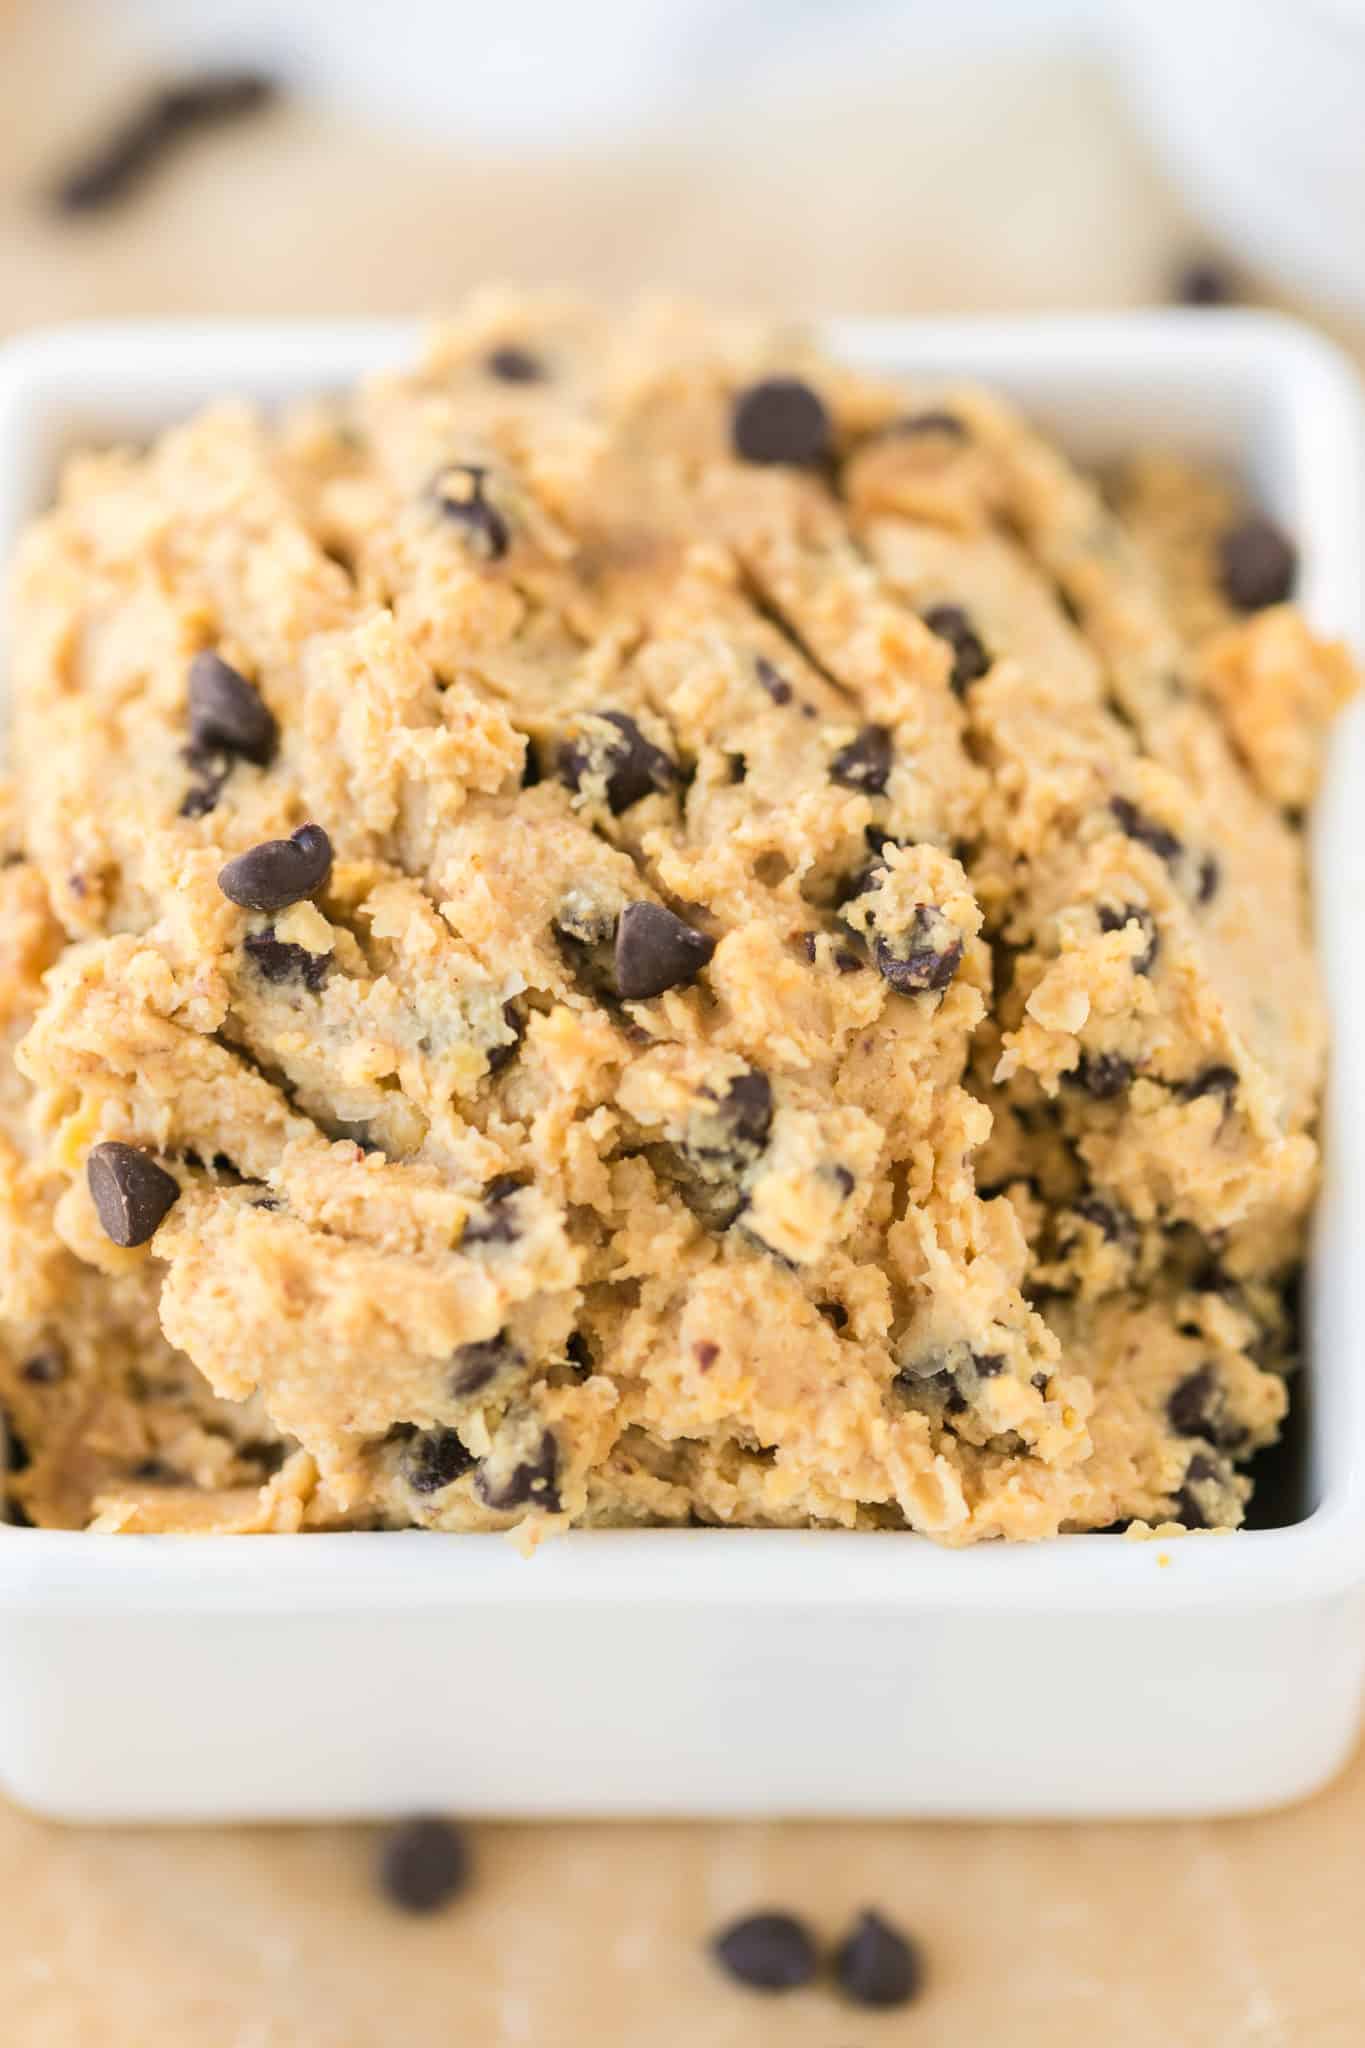 chocolate chip edible cookie dough made with chickpeas.